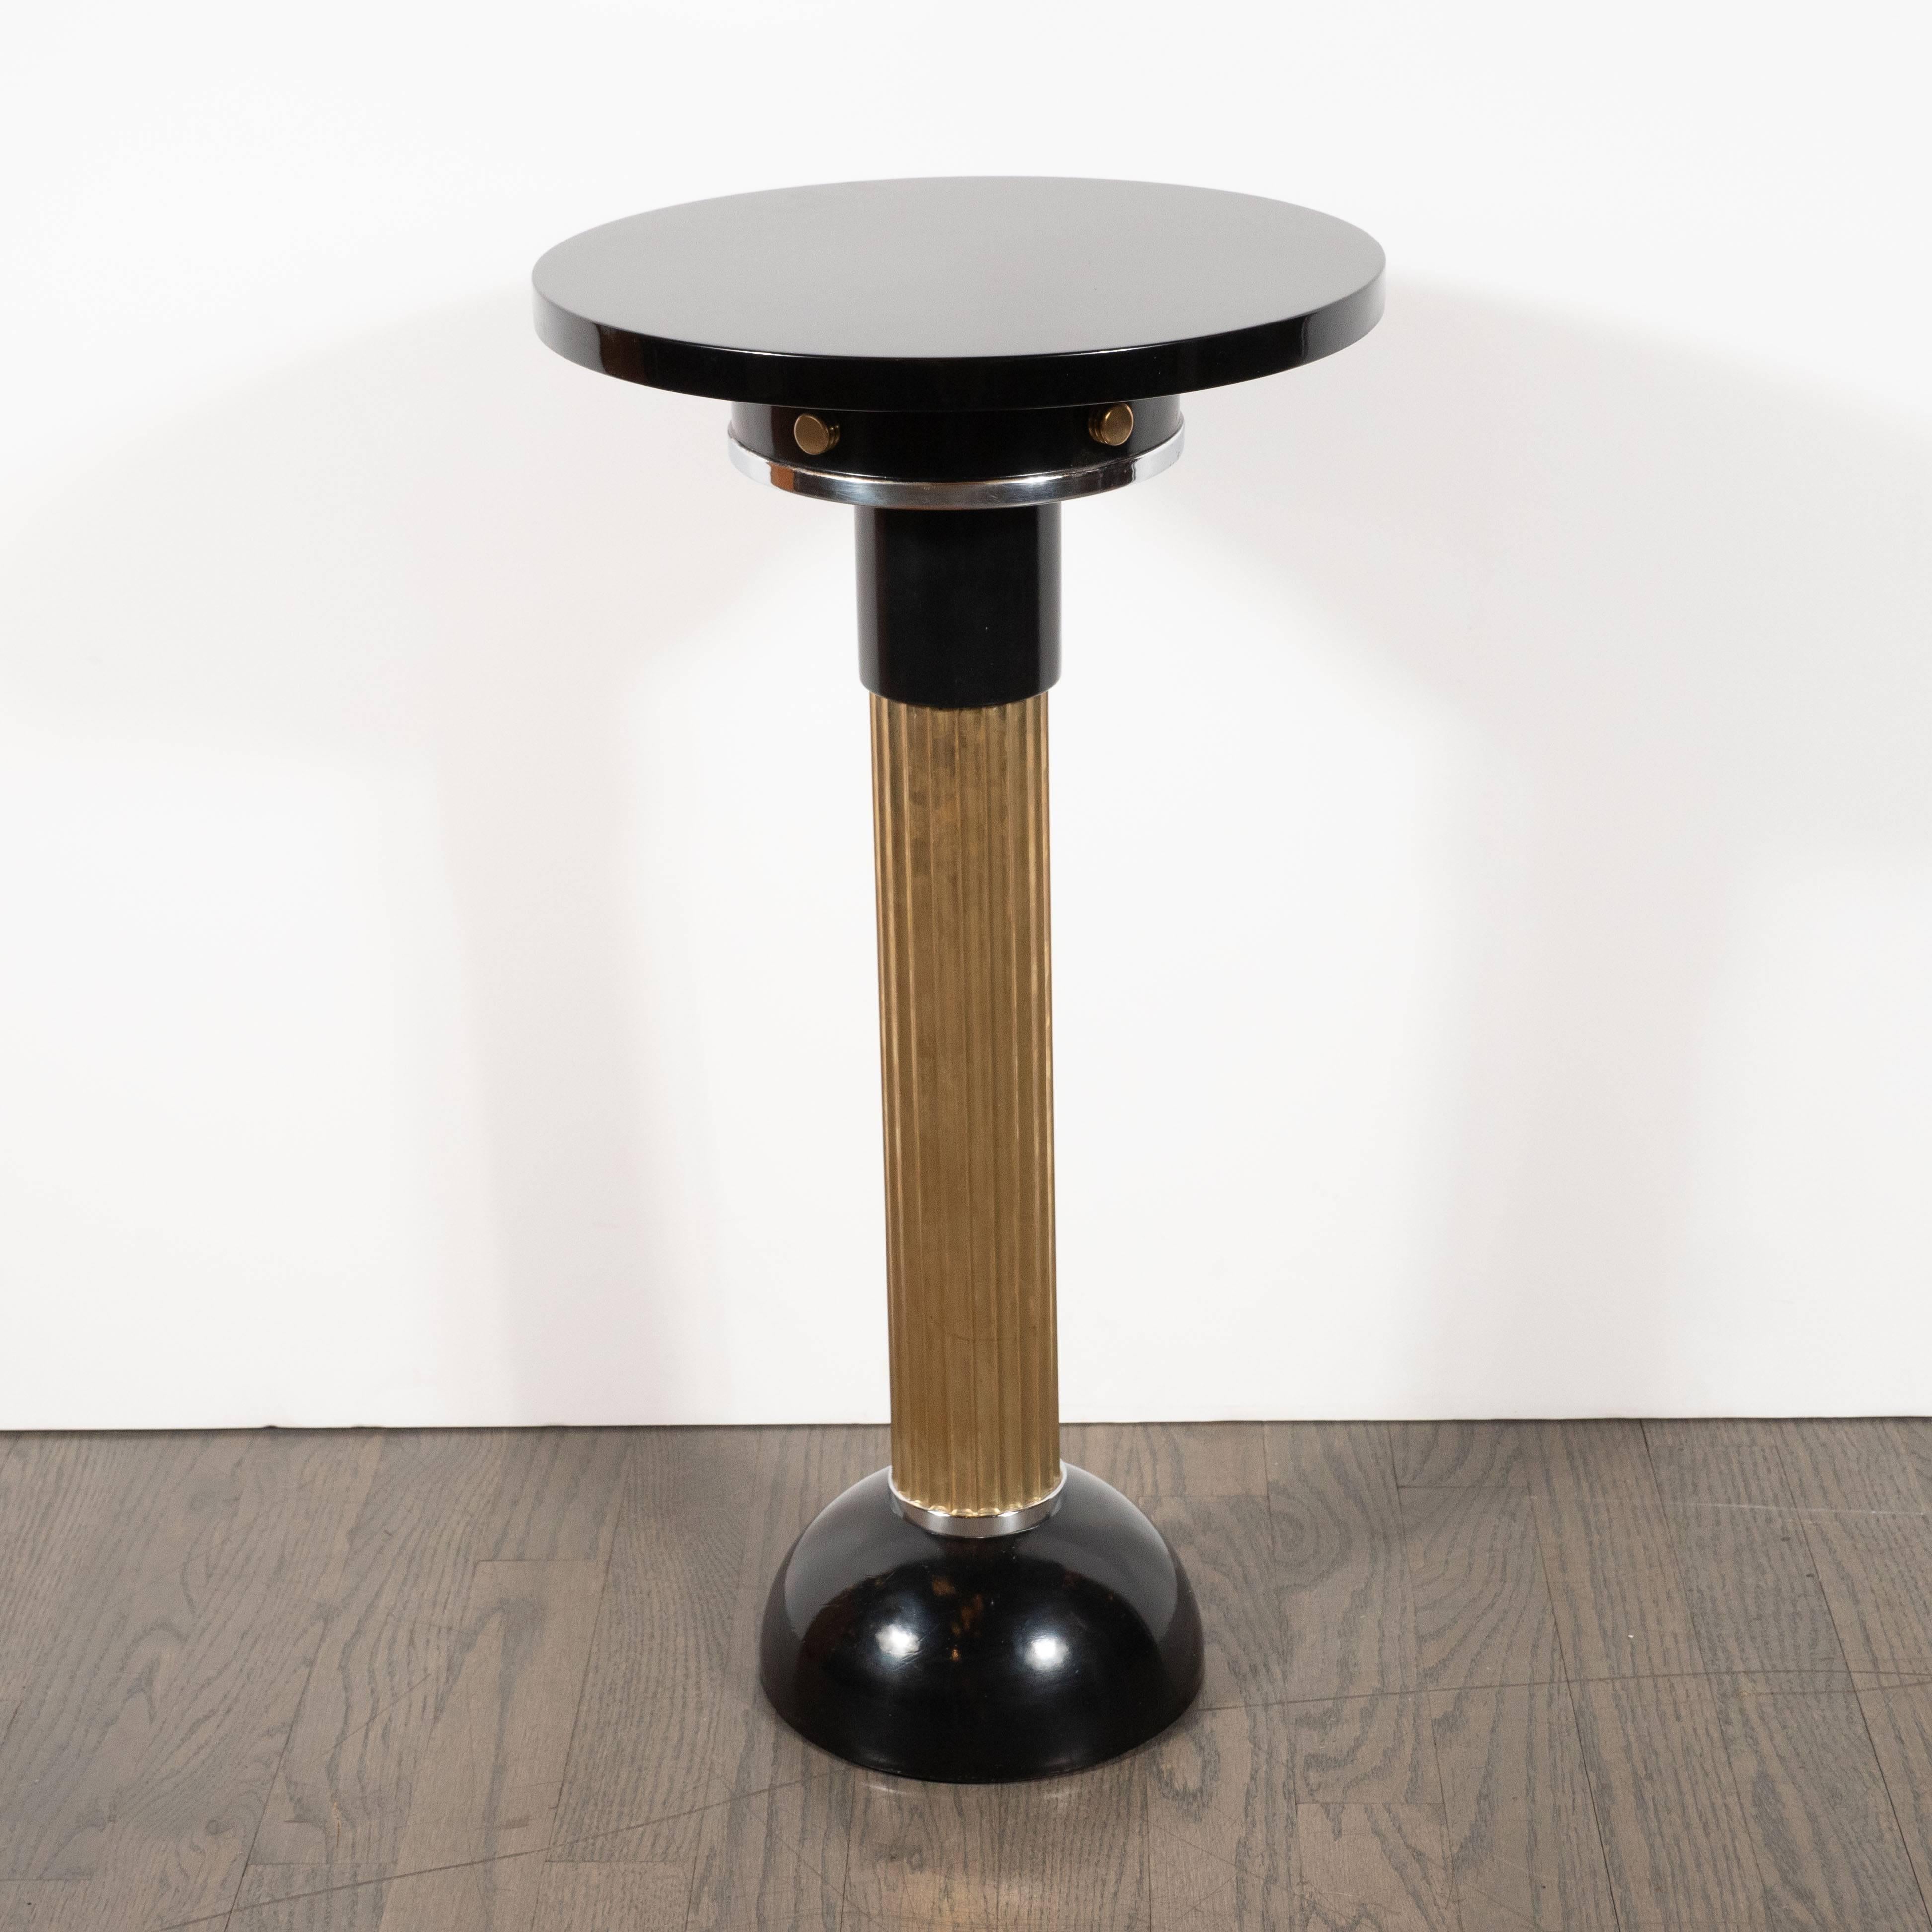 This dramatic and alluring Art Deco Machine Age drinks table was realized in the United States, circa 1935. It features a black enamel domed base; a reeded brass columnar cylindrical body and a skyscraper style top. The brass body is capped with a